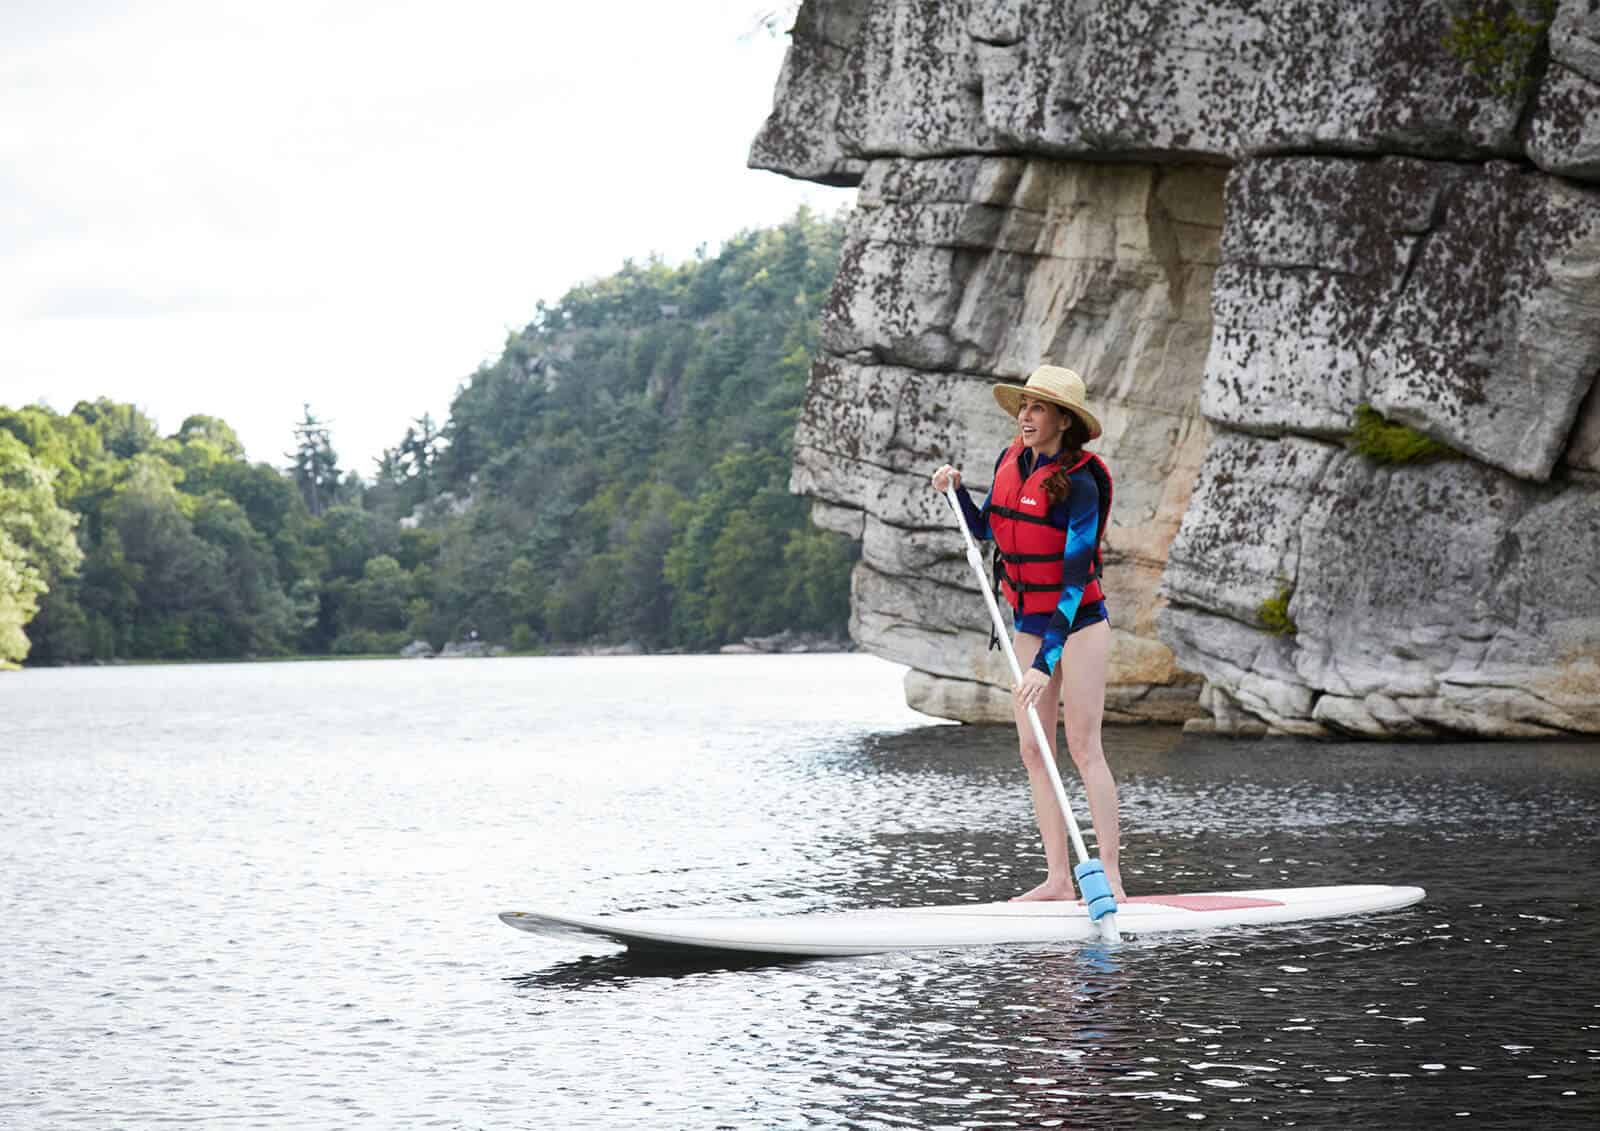 Young women stand-up paddle boarding